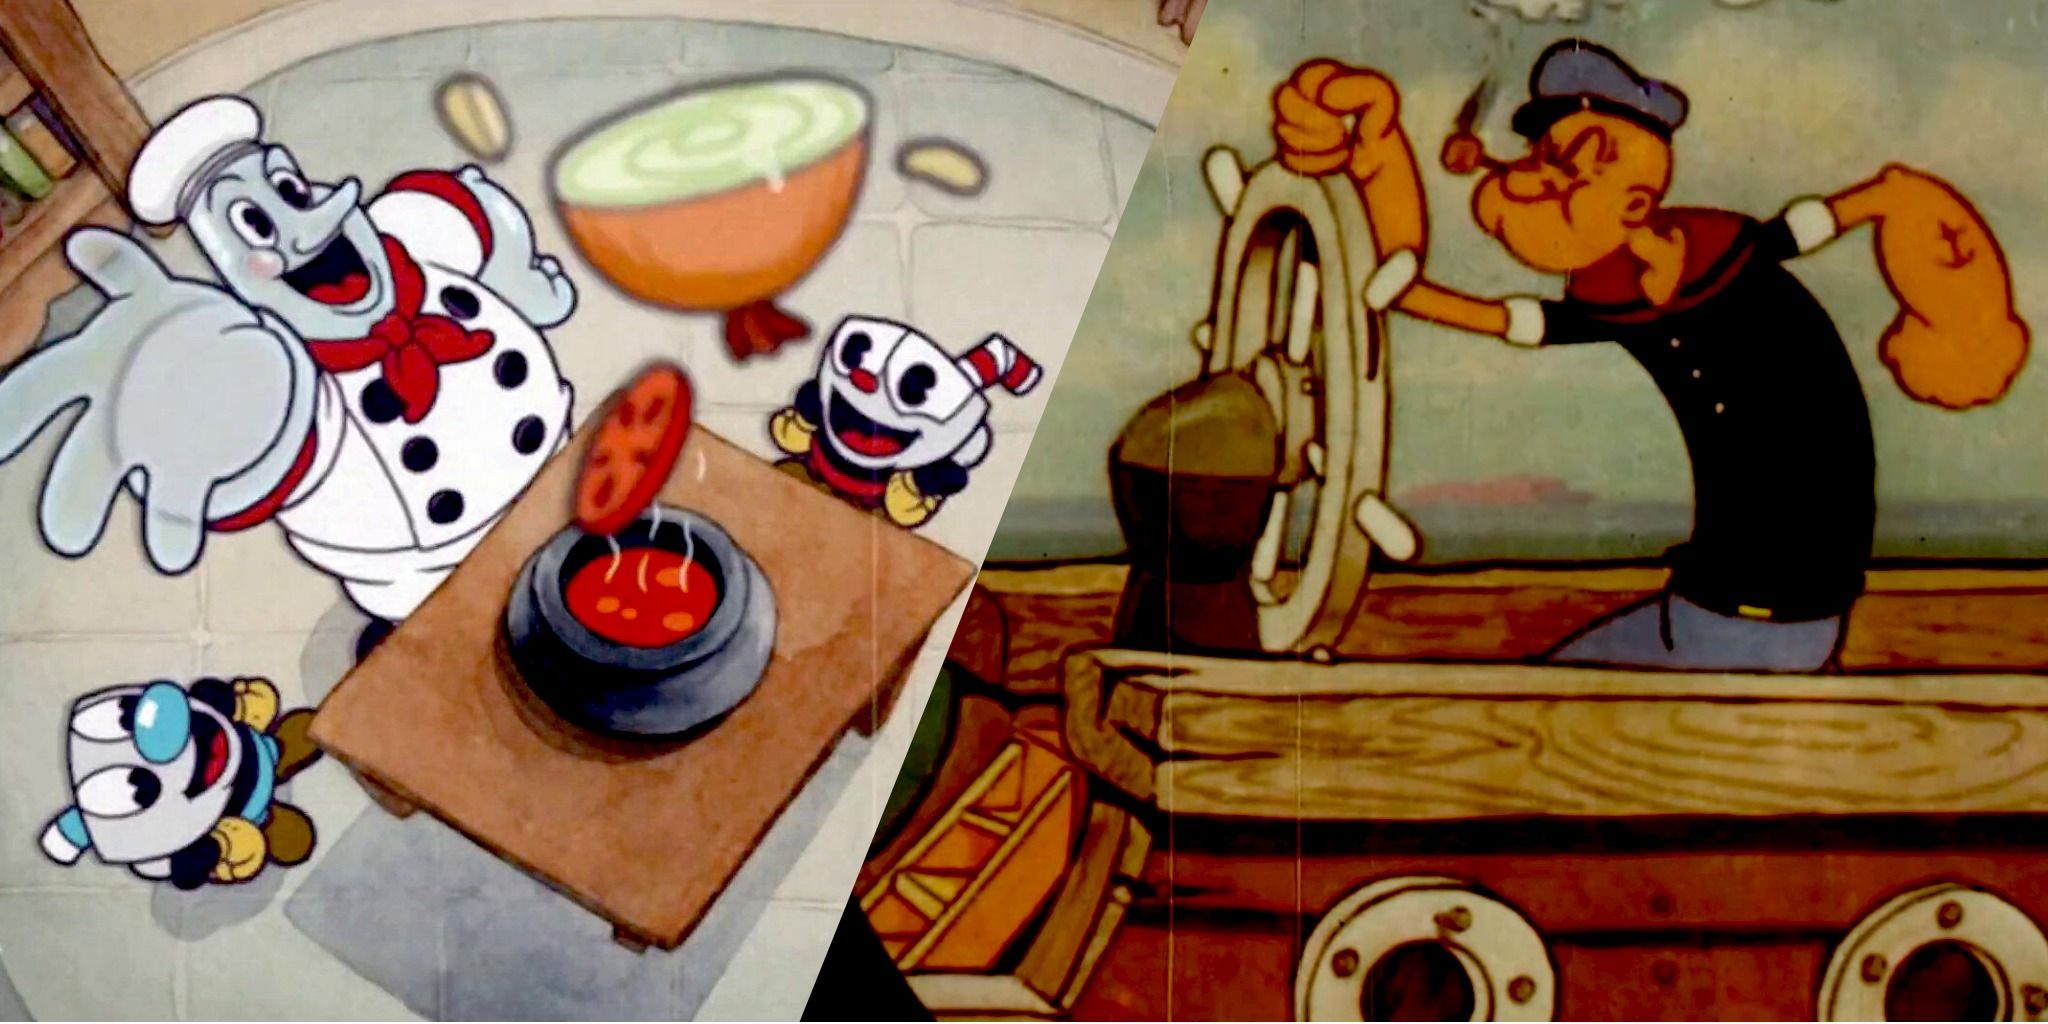 5 Classic Cartoons Cuphead Fans Should Watch featured image